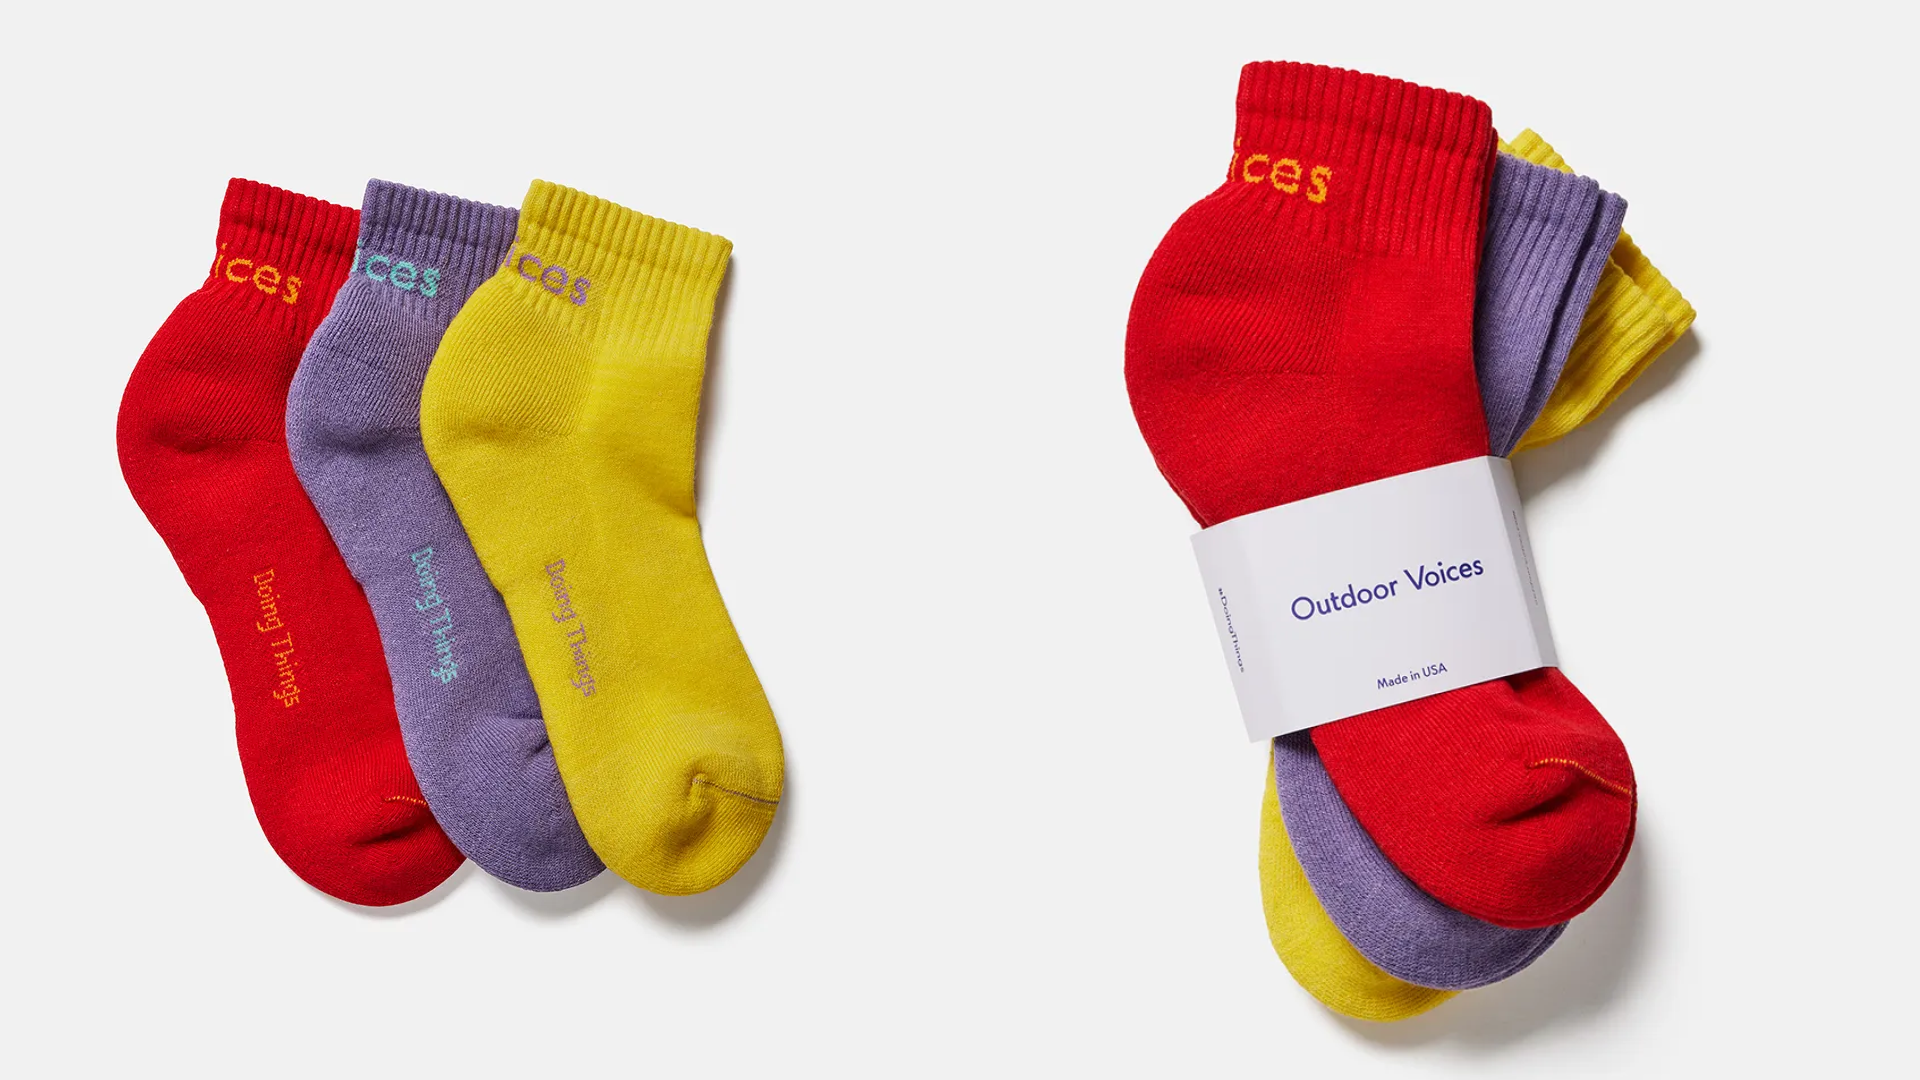 Outdoor Voices socks